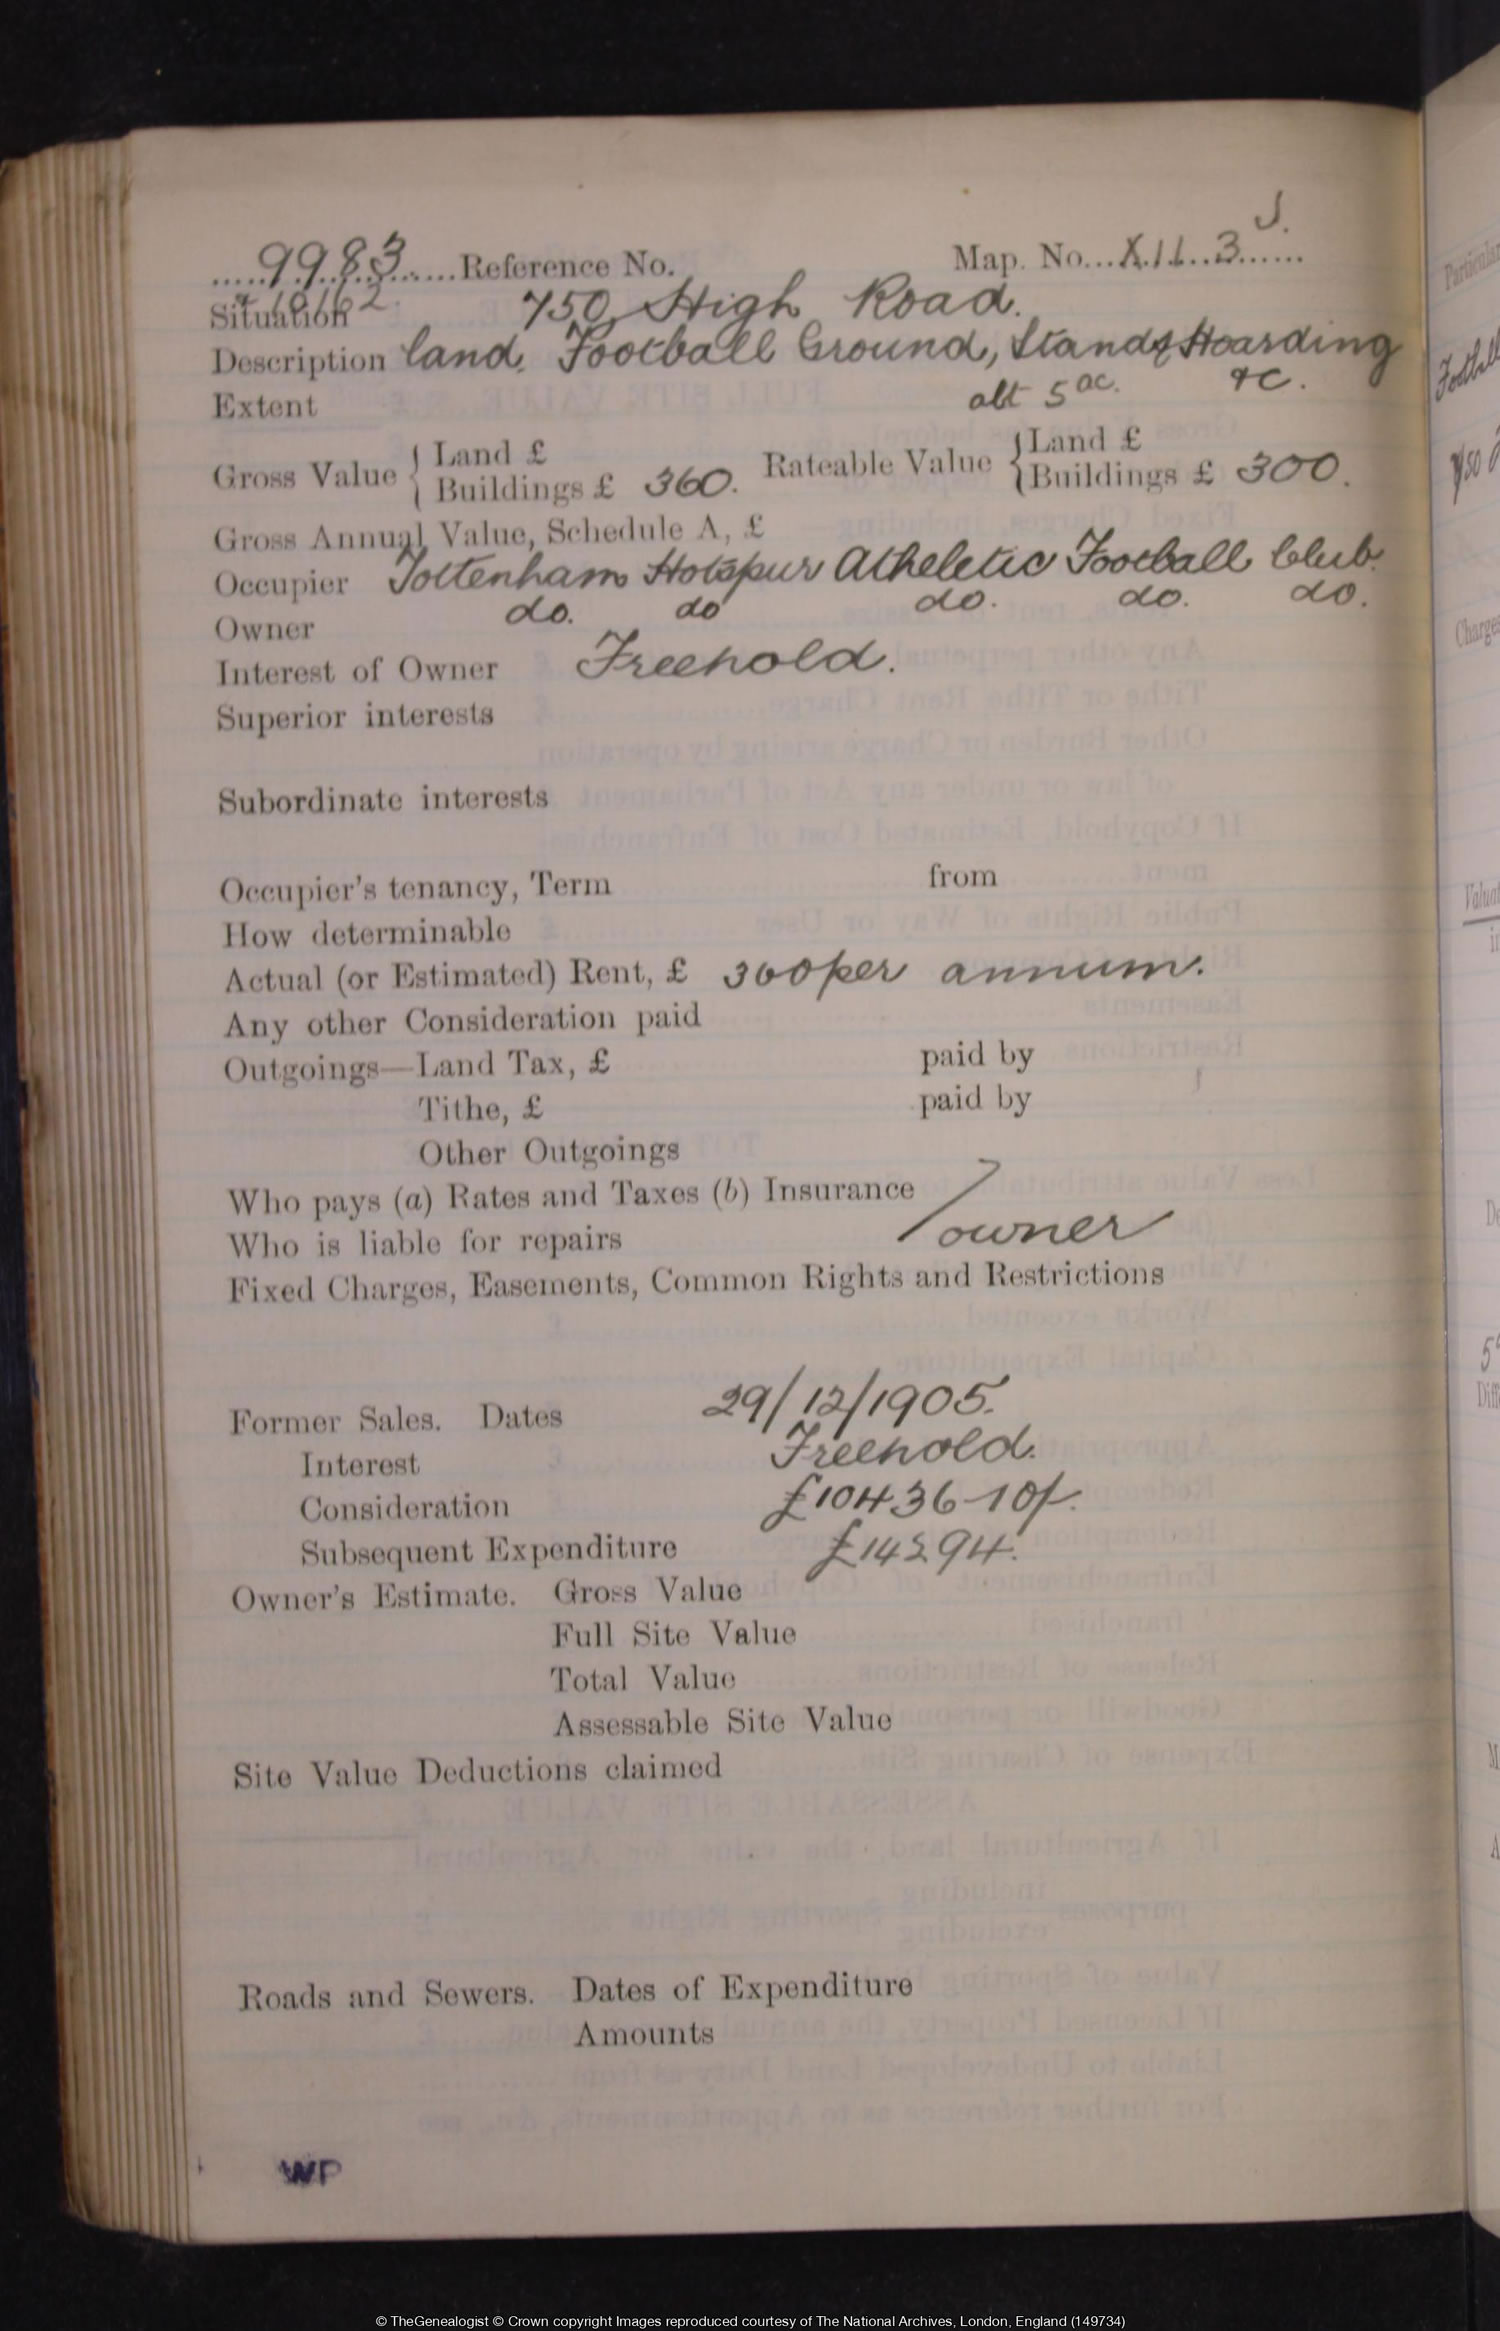 Lloyd George Domesday Field Book for the Tottenham Hotspur Athletic Football Club